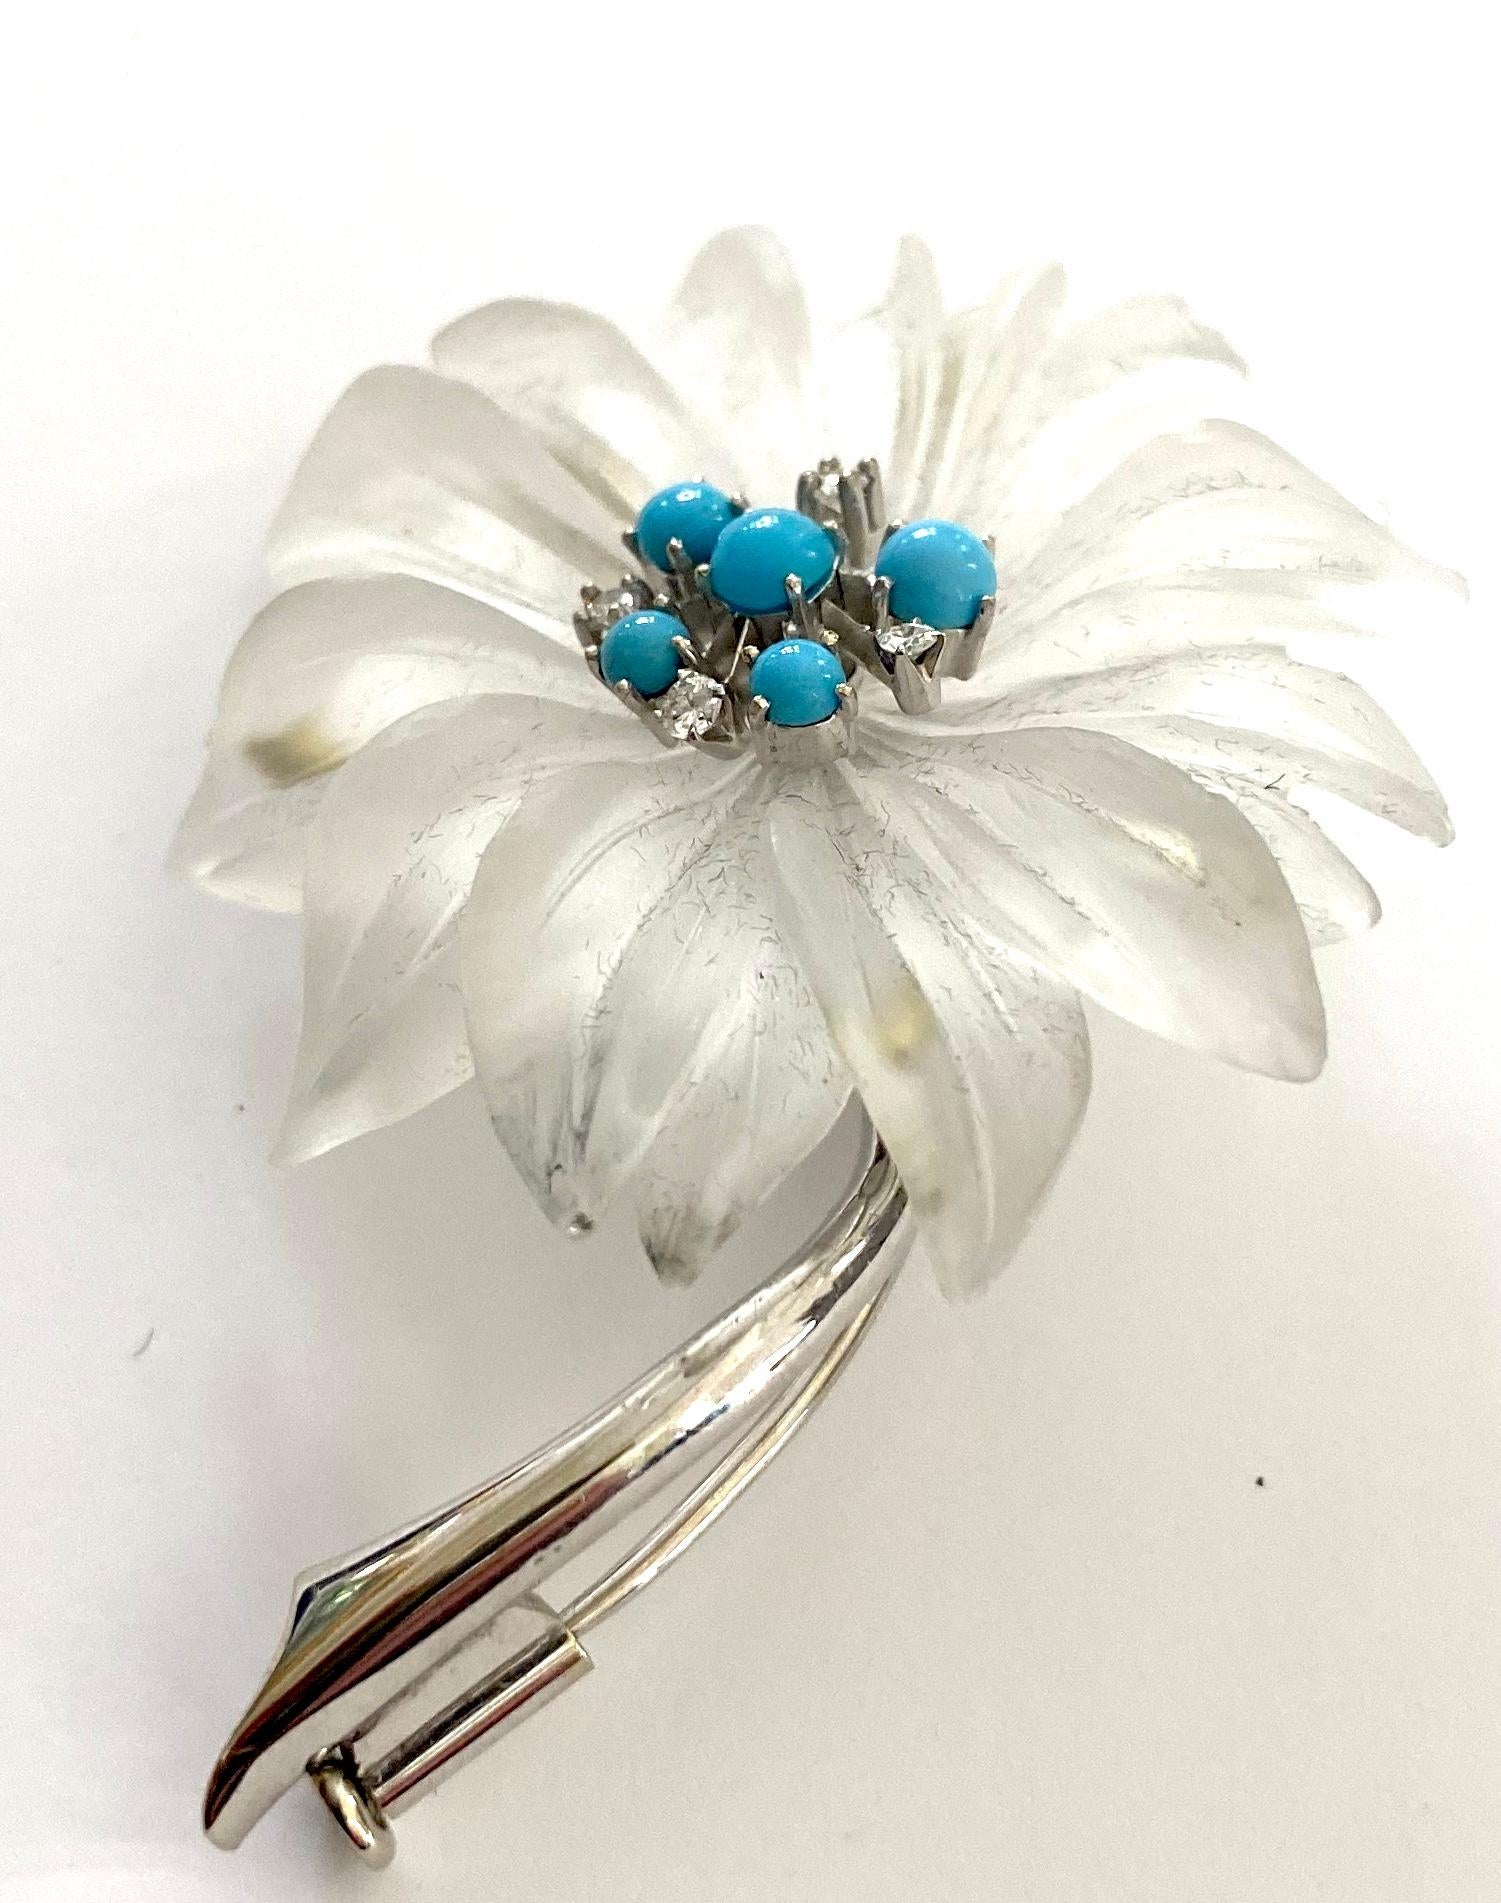 -  14K. whitegold flower brooch, Quartz carved stone with 5 syntetics turkois and 4 natural diamonds 
-   Vienna ca 1960 
-   Makers mark: KD =  Konrad Dworak
-   Weight: 17.61 gram.
-   Size: 58 x 46 x 12 mm
-   In the 1960s, these flower brooches